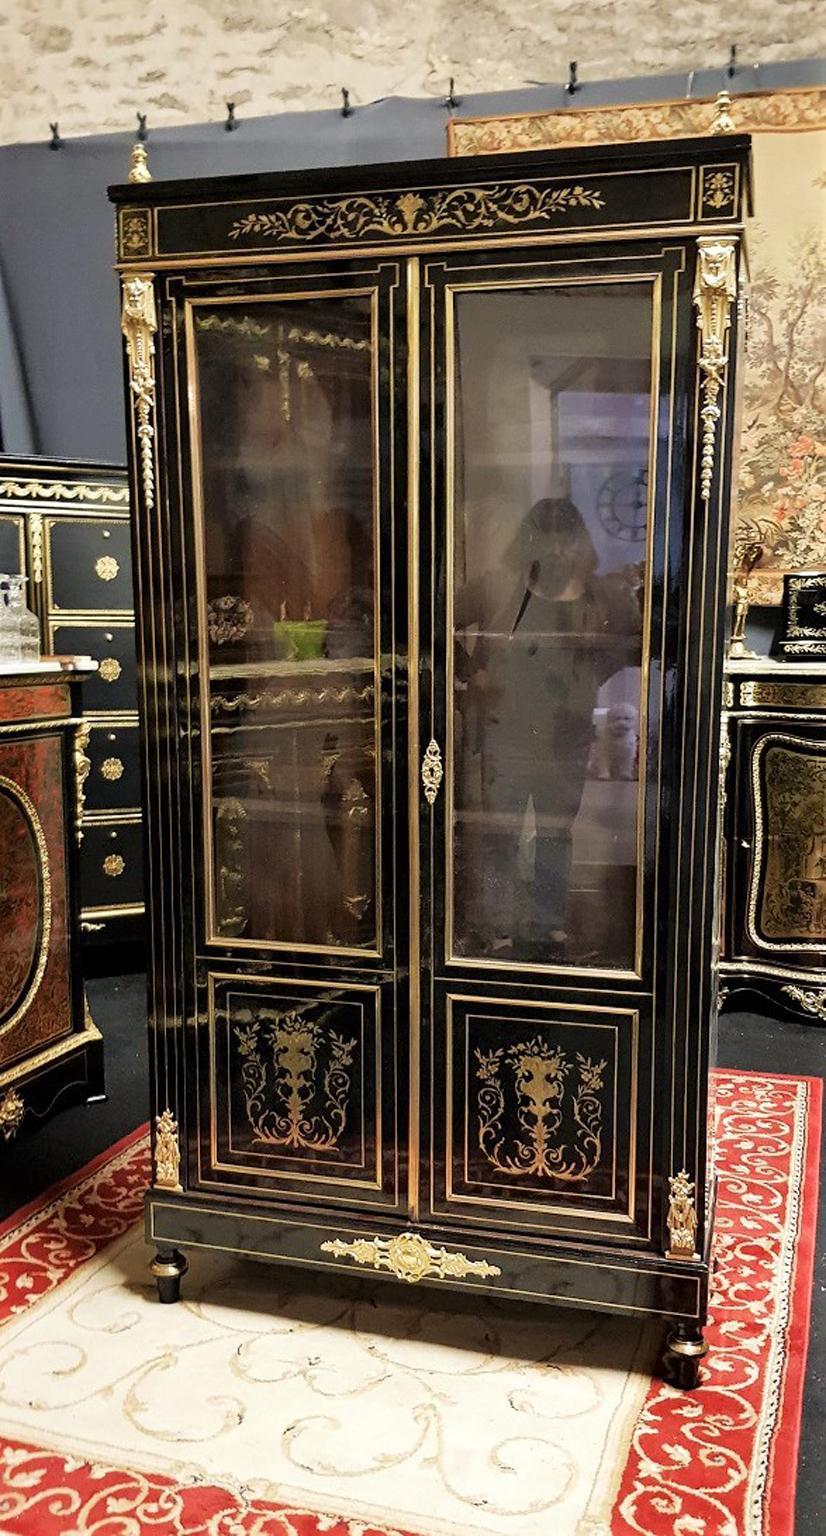 Beautiful Vitrine Bookcasei in Boulle style brass marquetry, interlaced patterns, foliage, scrolls and flower urn. Ornamentations in gilt bronze with falls, ingot molds, apron, spandrels and patterns on the flanks. Mahogany interior with 4